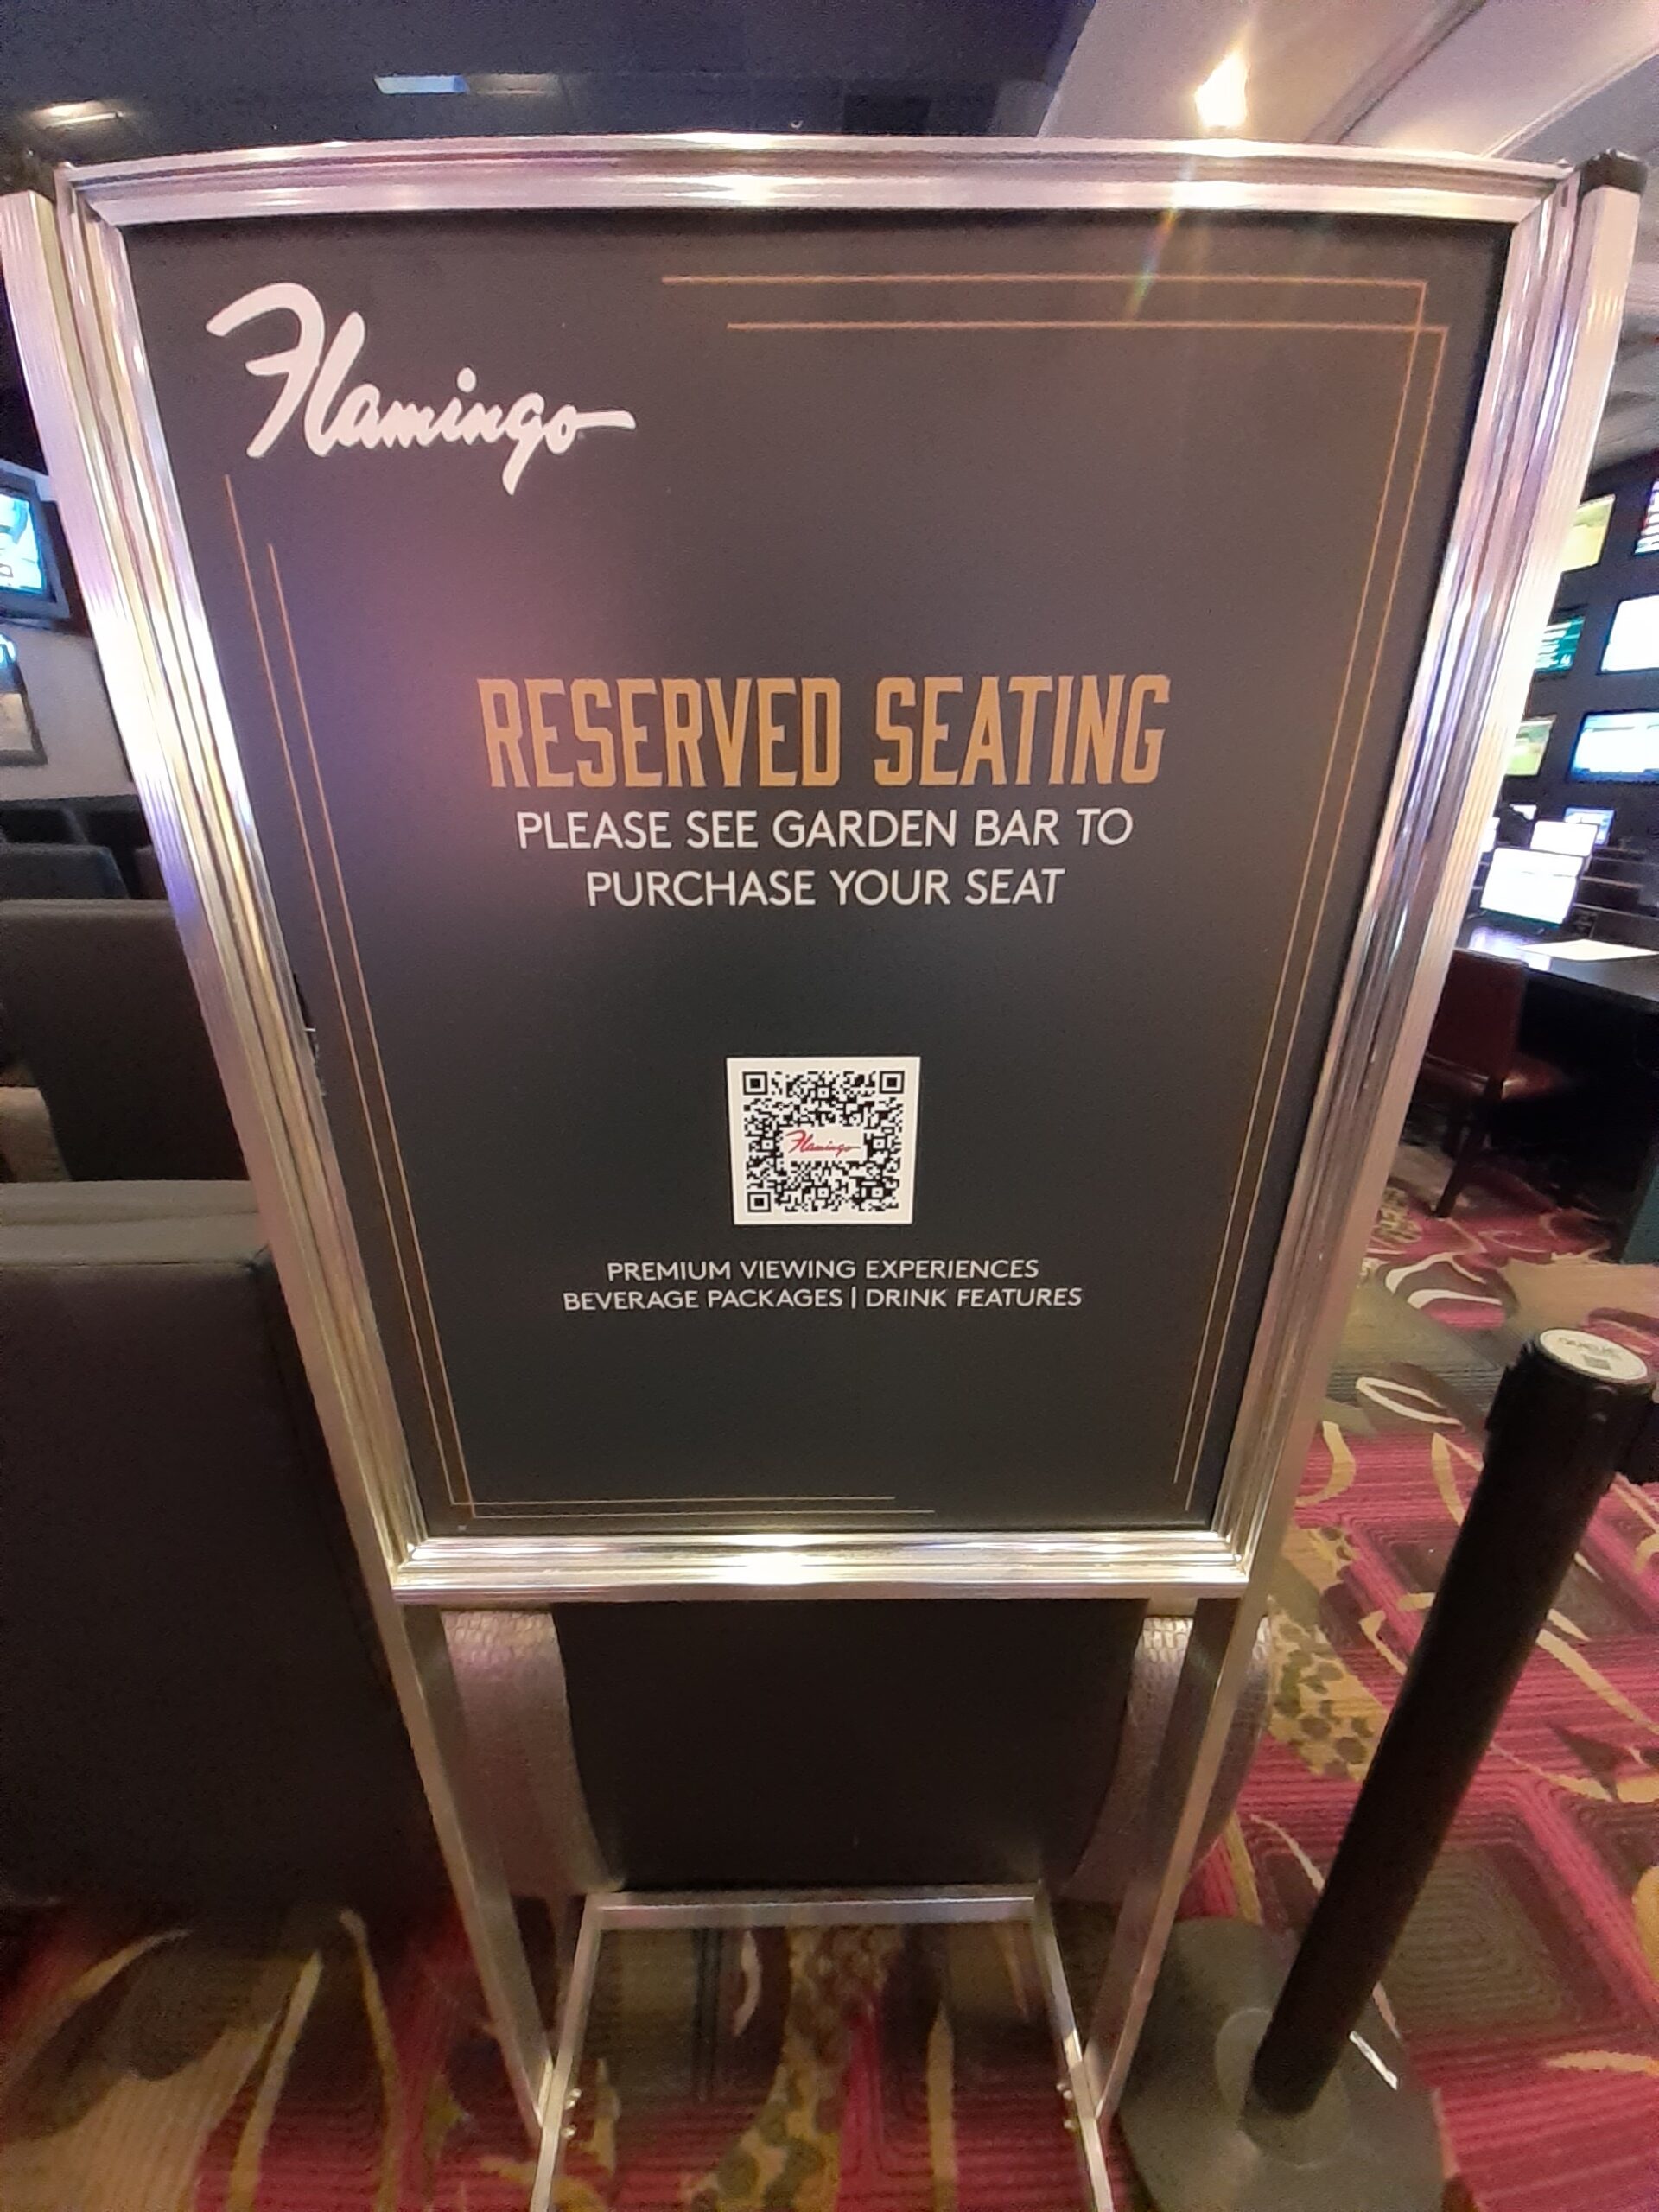 Flamingo Reservations - Sportsbook Review - Square Bettor